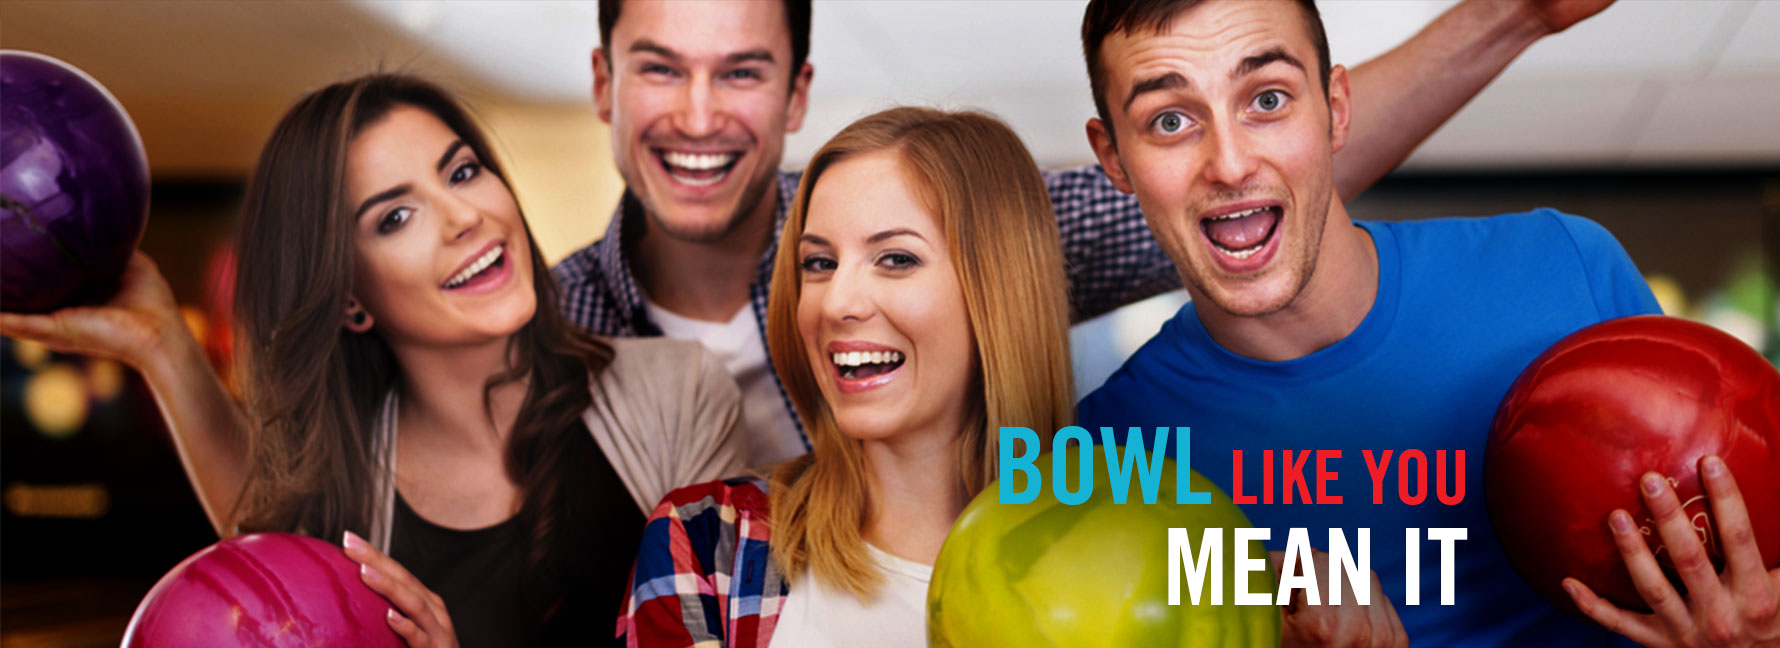 Four people holding bowling balls and smiling